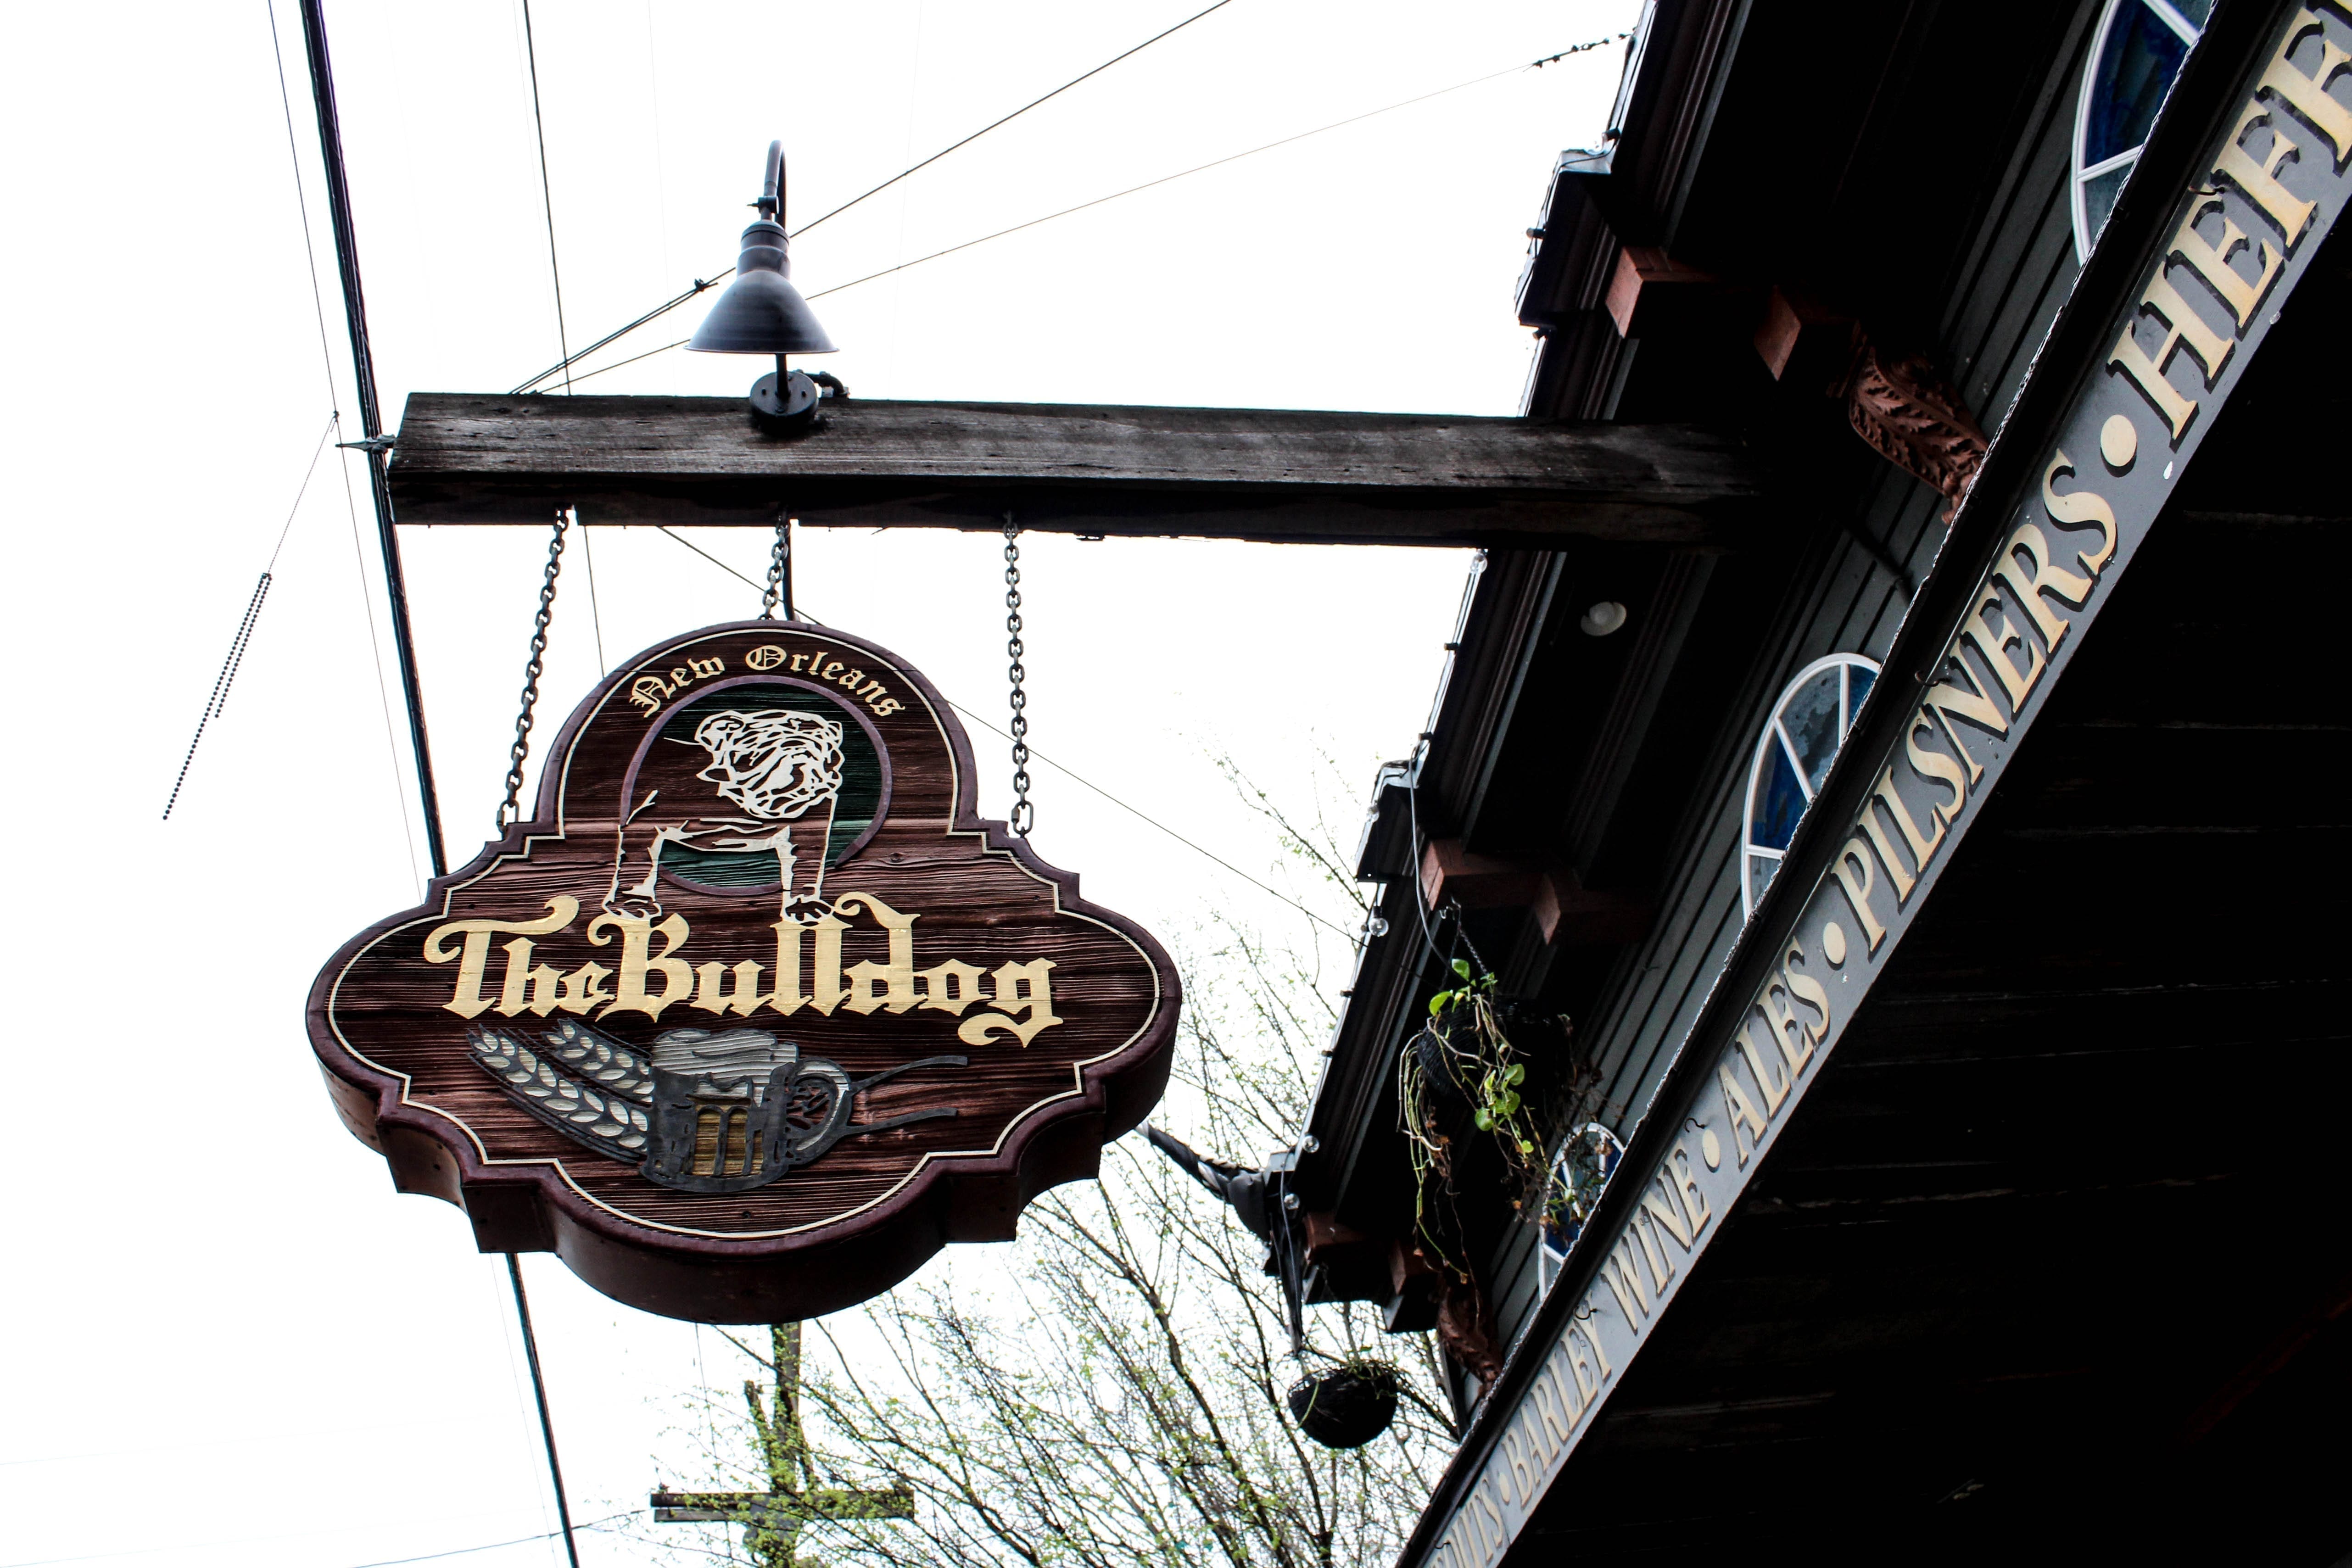 The Bulldog New Orleans sign